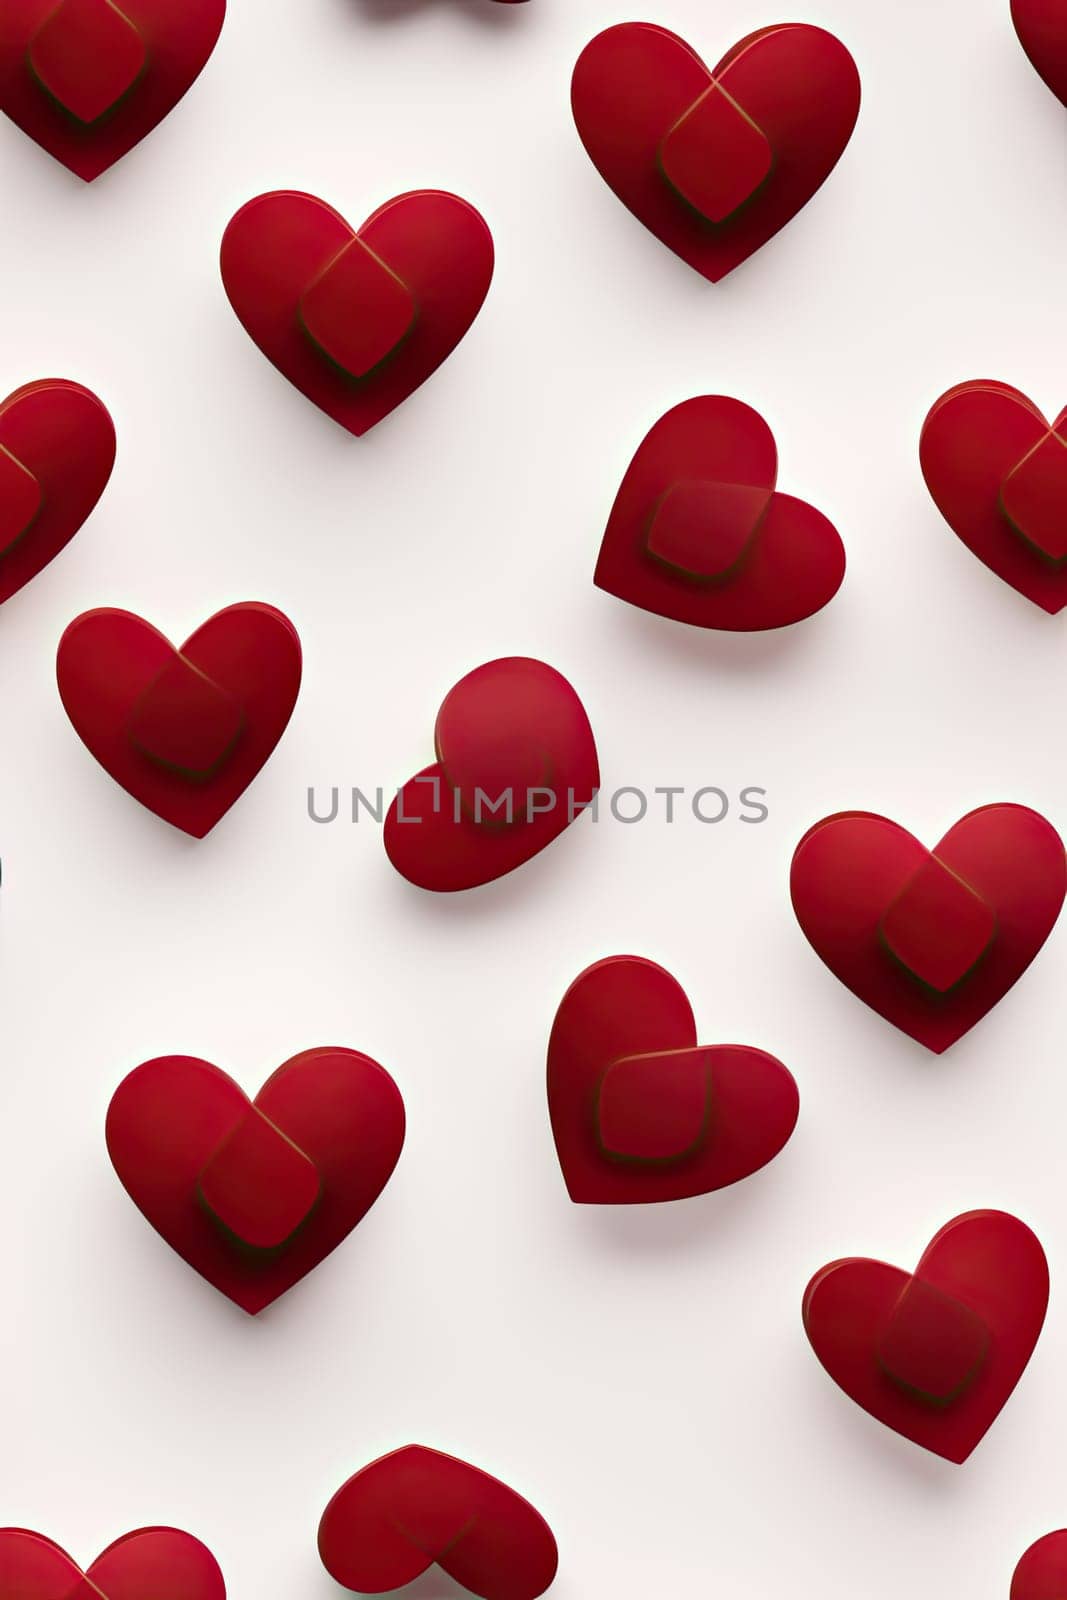 Valentines day love symbol, 3d hearts in vertical isolated on white background.